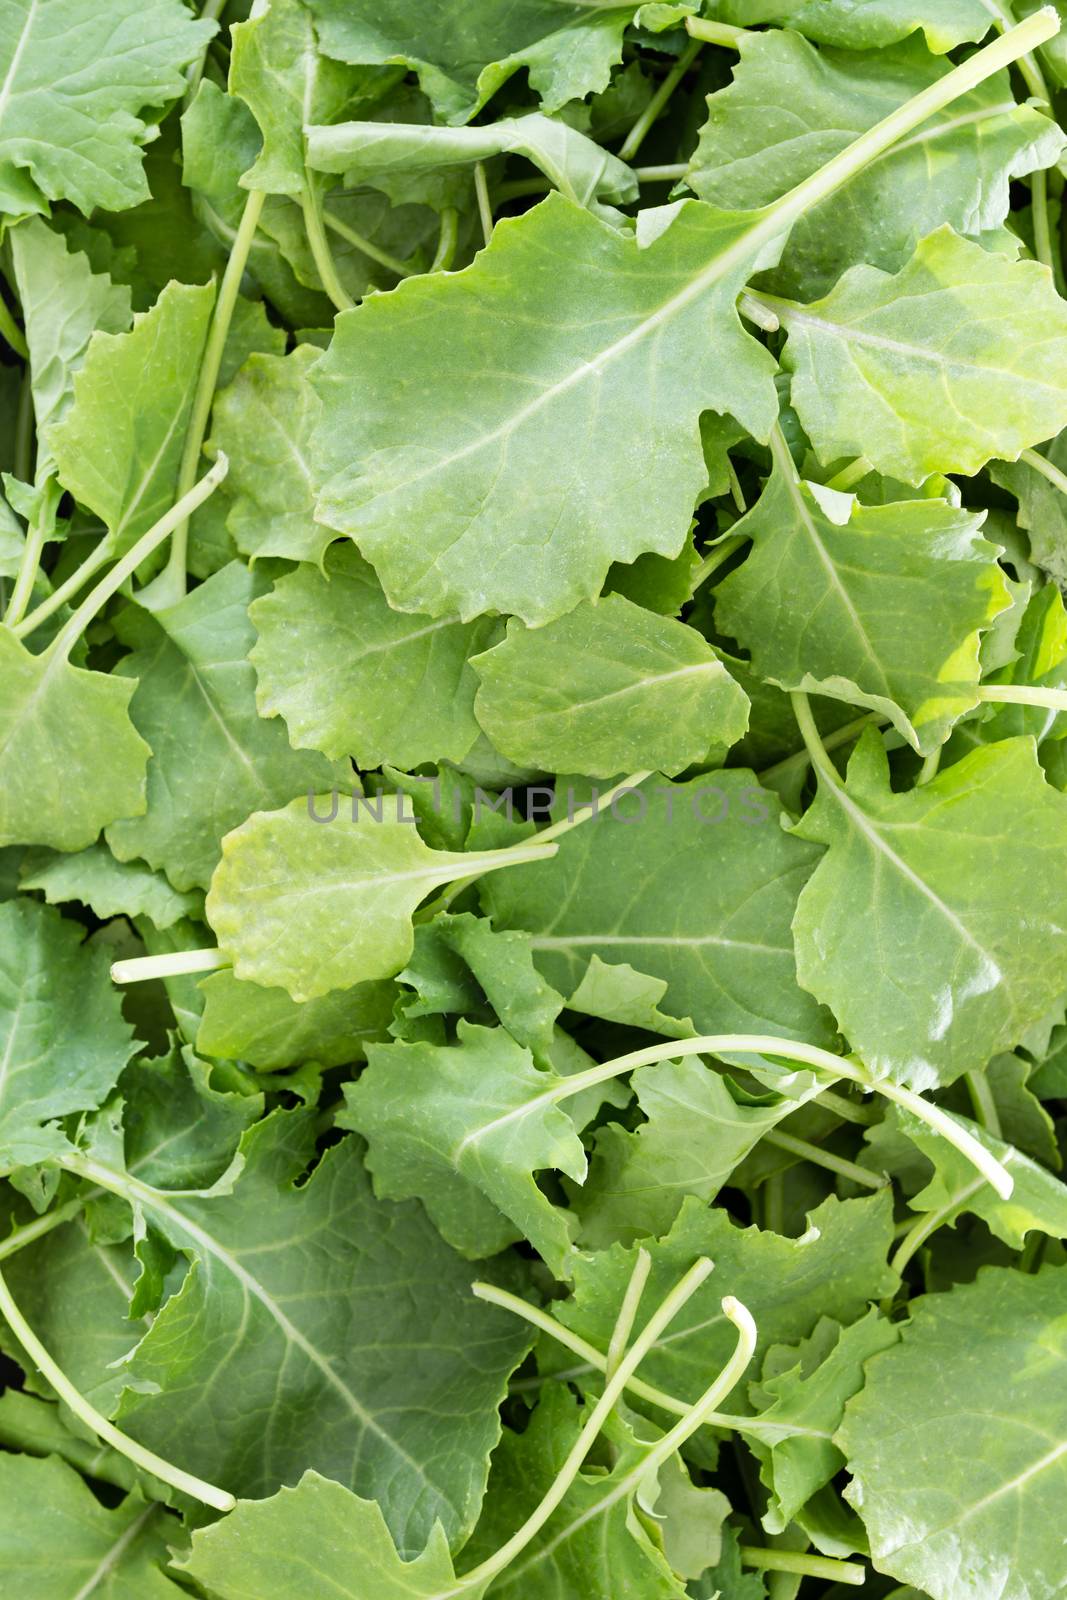 Background texture of fresh green baby kale leaves that have been washed and drained ready for use in a salad